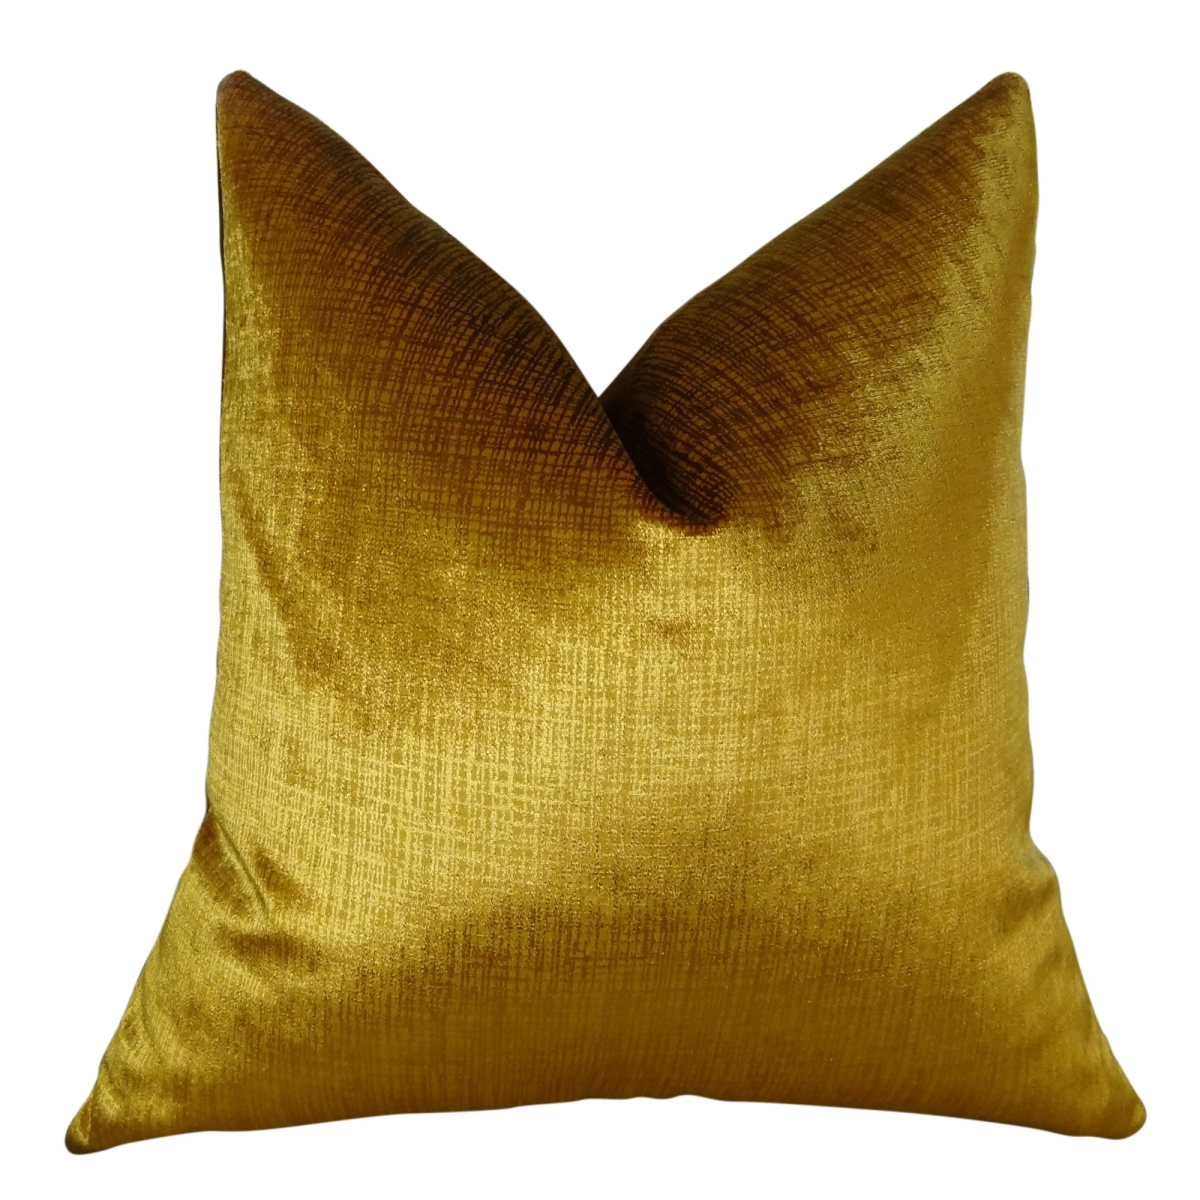 Plutus PB11249-1225-DP Lumiere Bronze Handmade Double Sided Throw Pillow, Gold - 12 x 25 in.